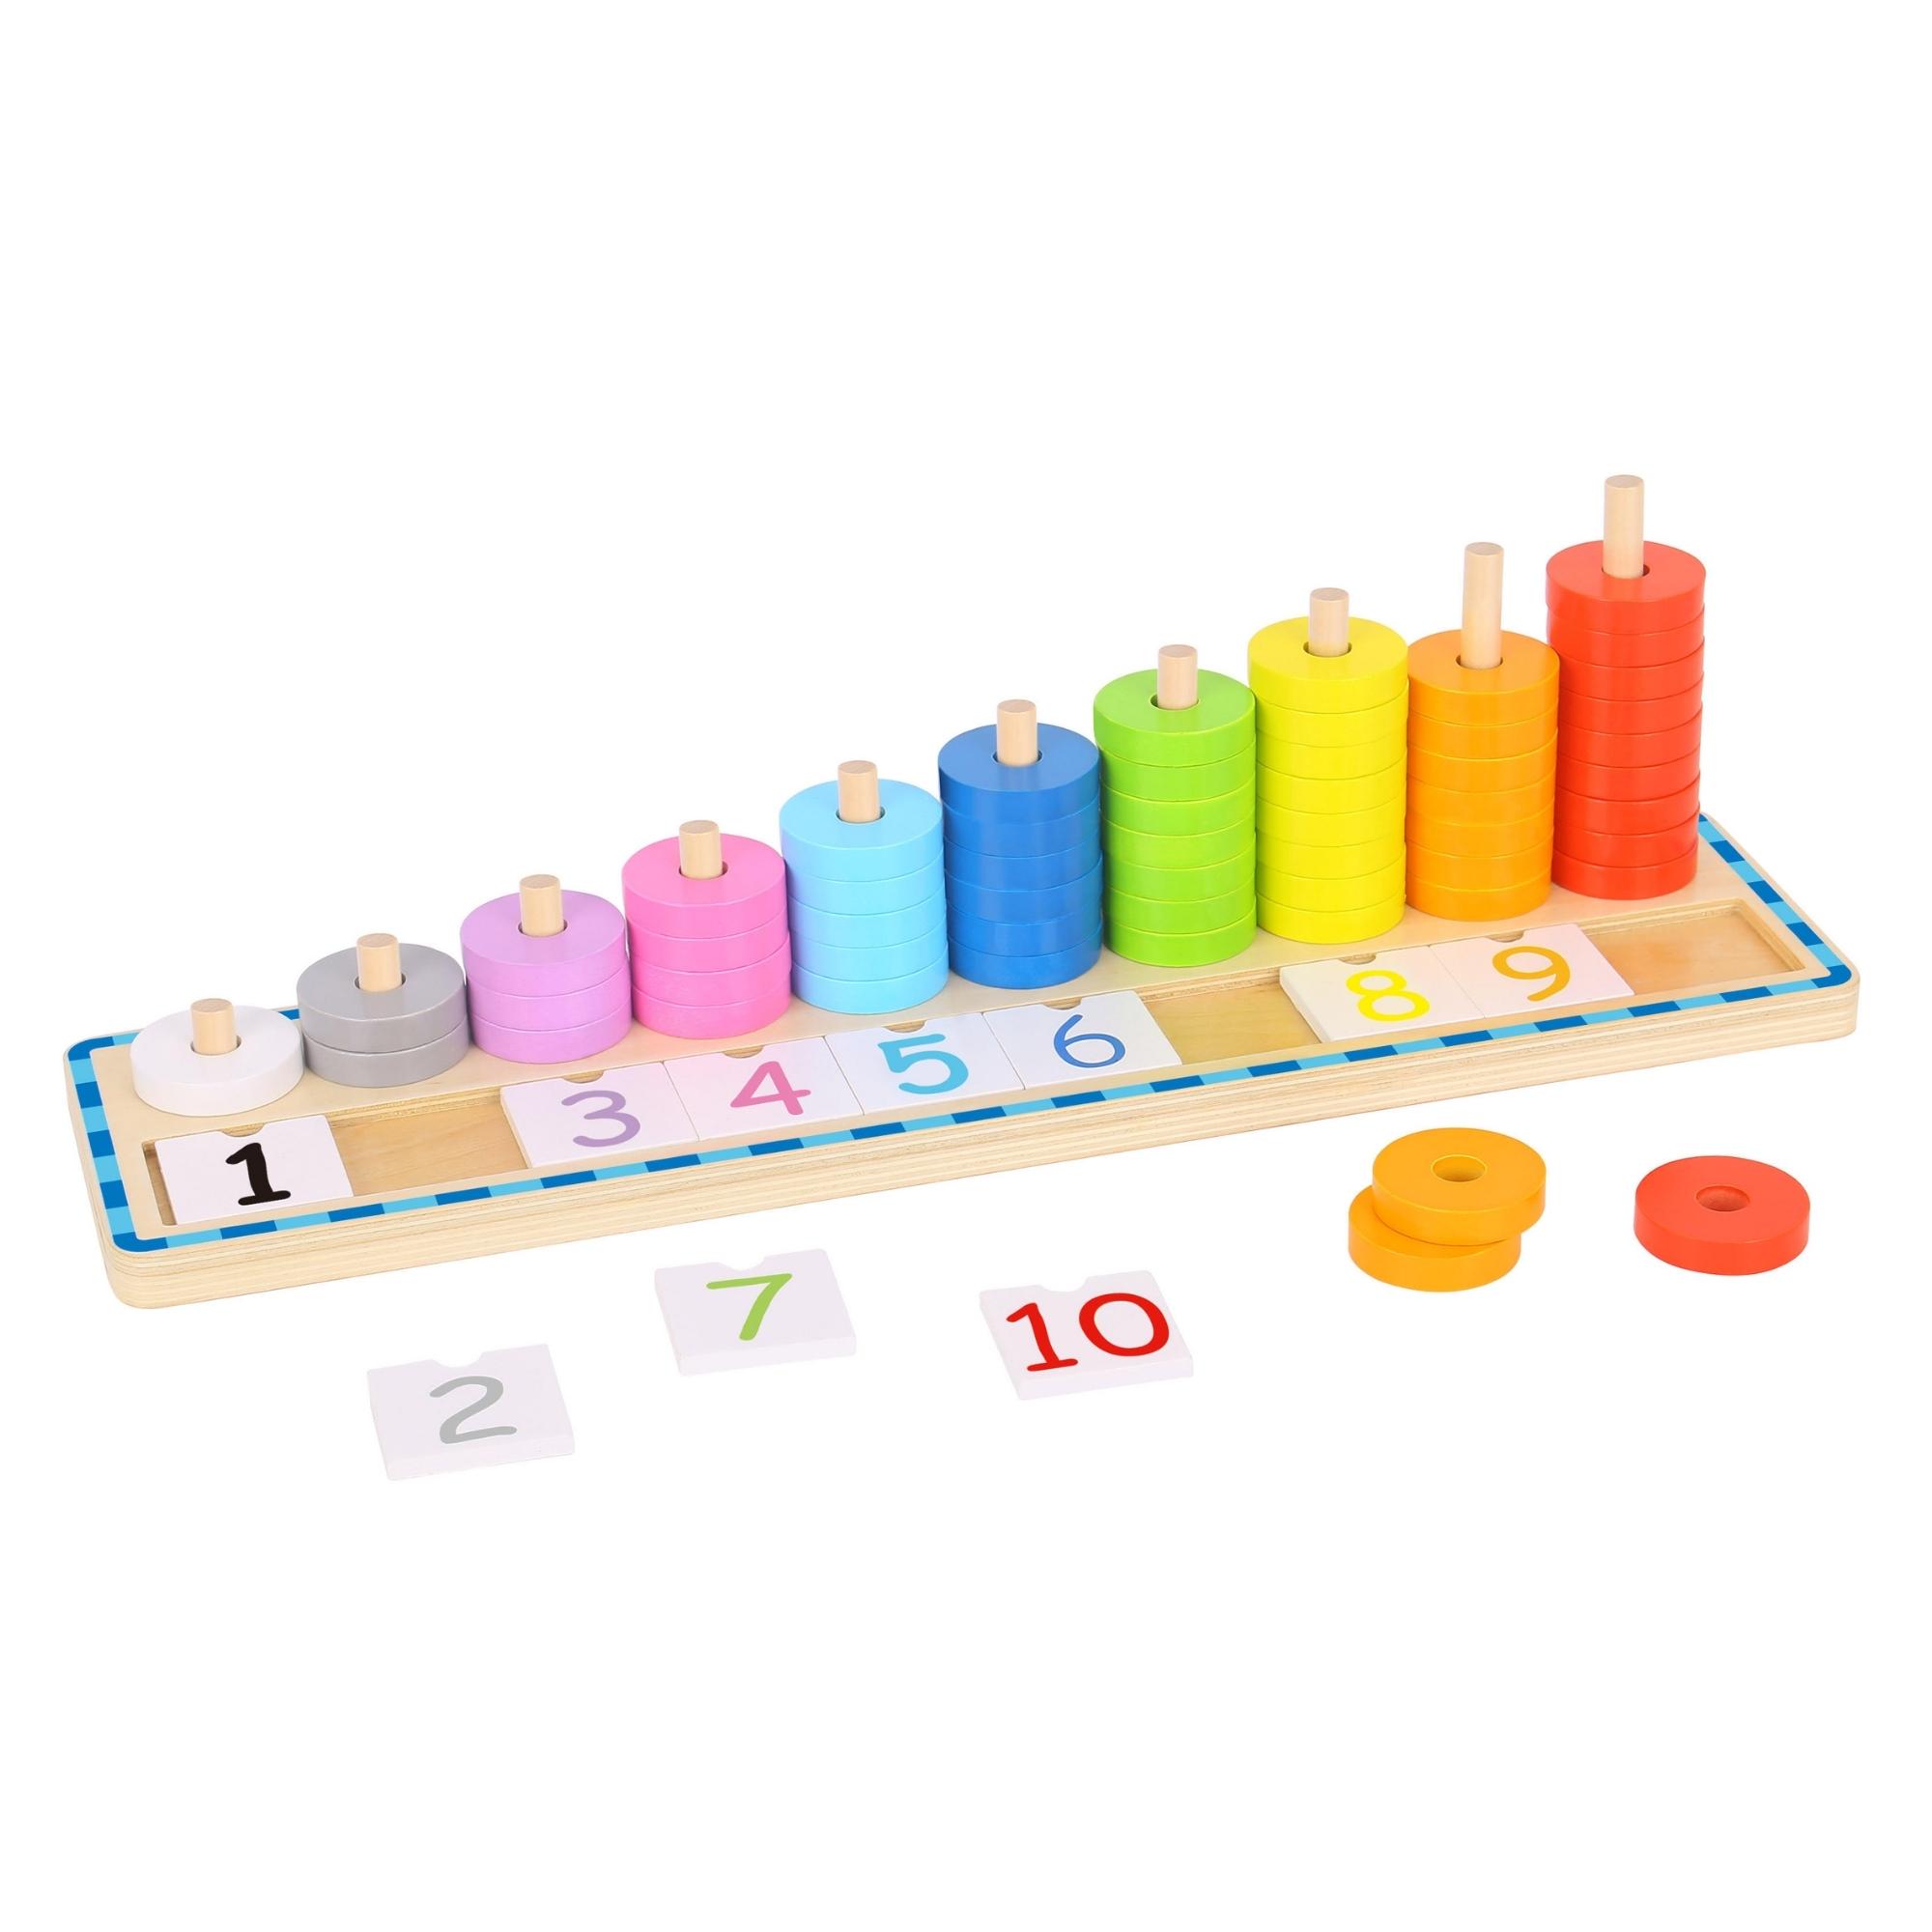 Count and Sort Stacking Tower - image 1 of 7